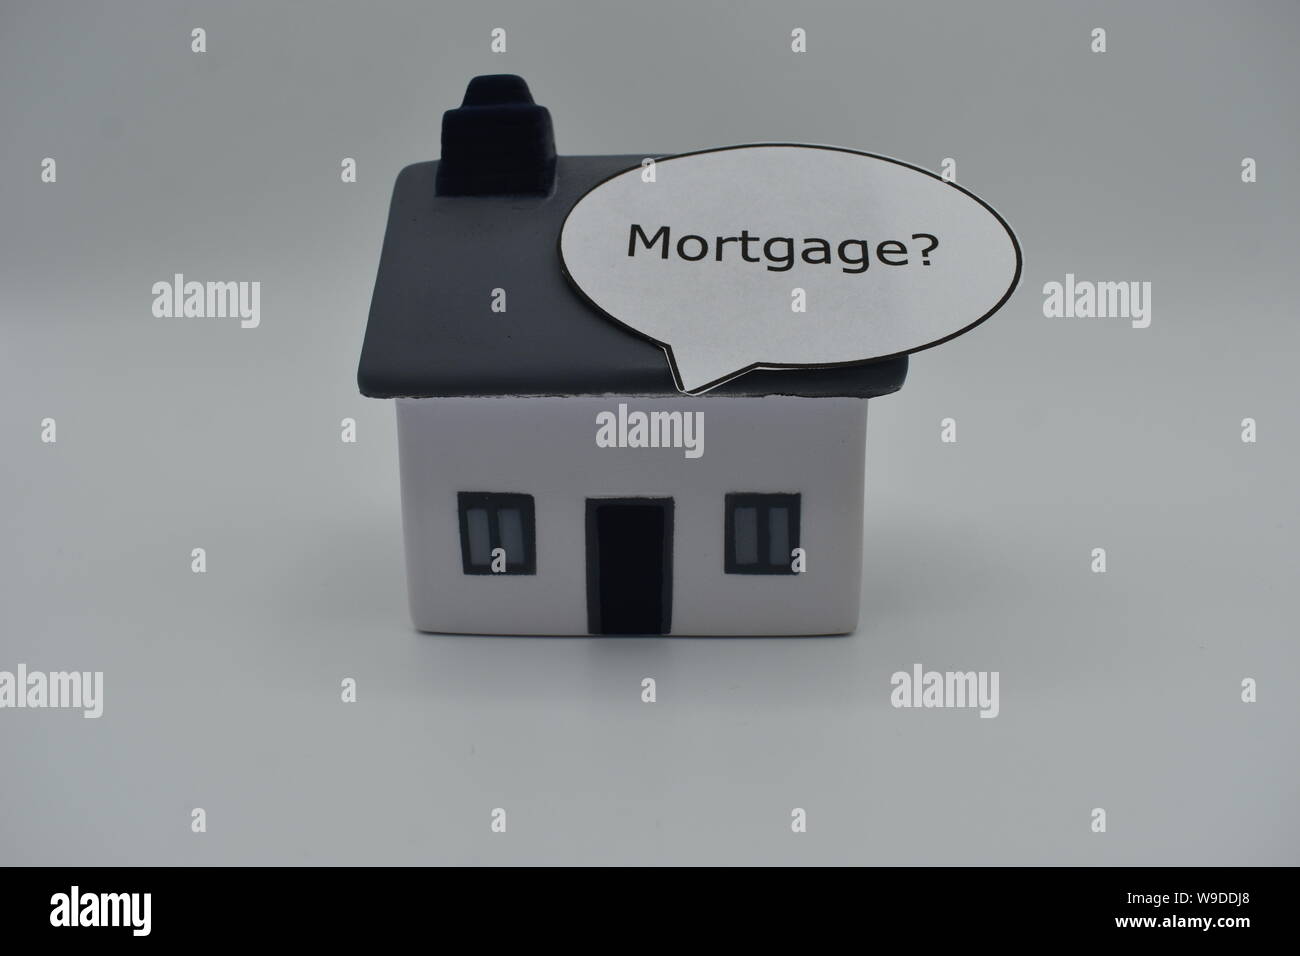 A model house with the word 'Mortgage?' in a speech bubble on the roof. Stock Photo